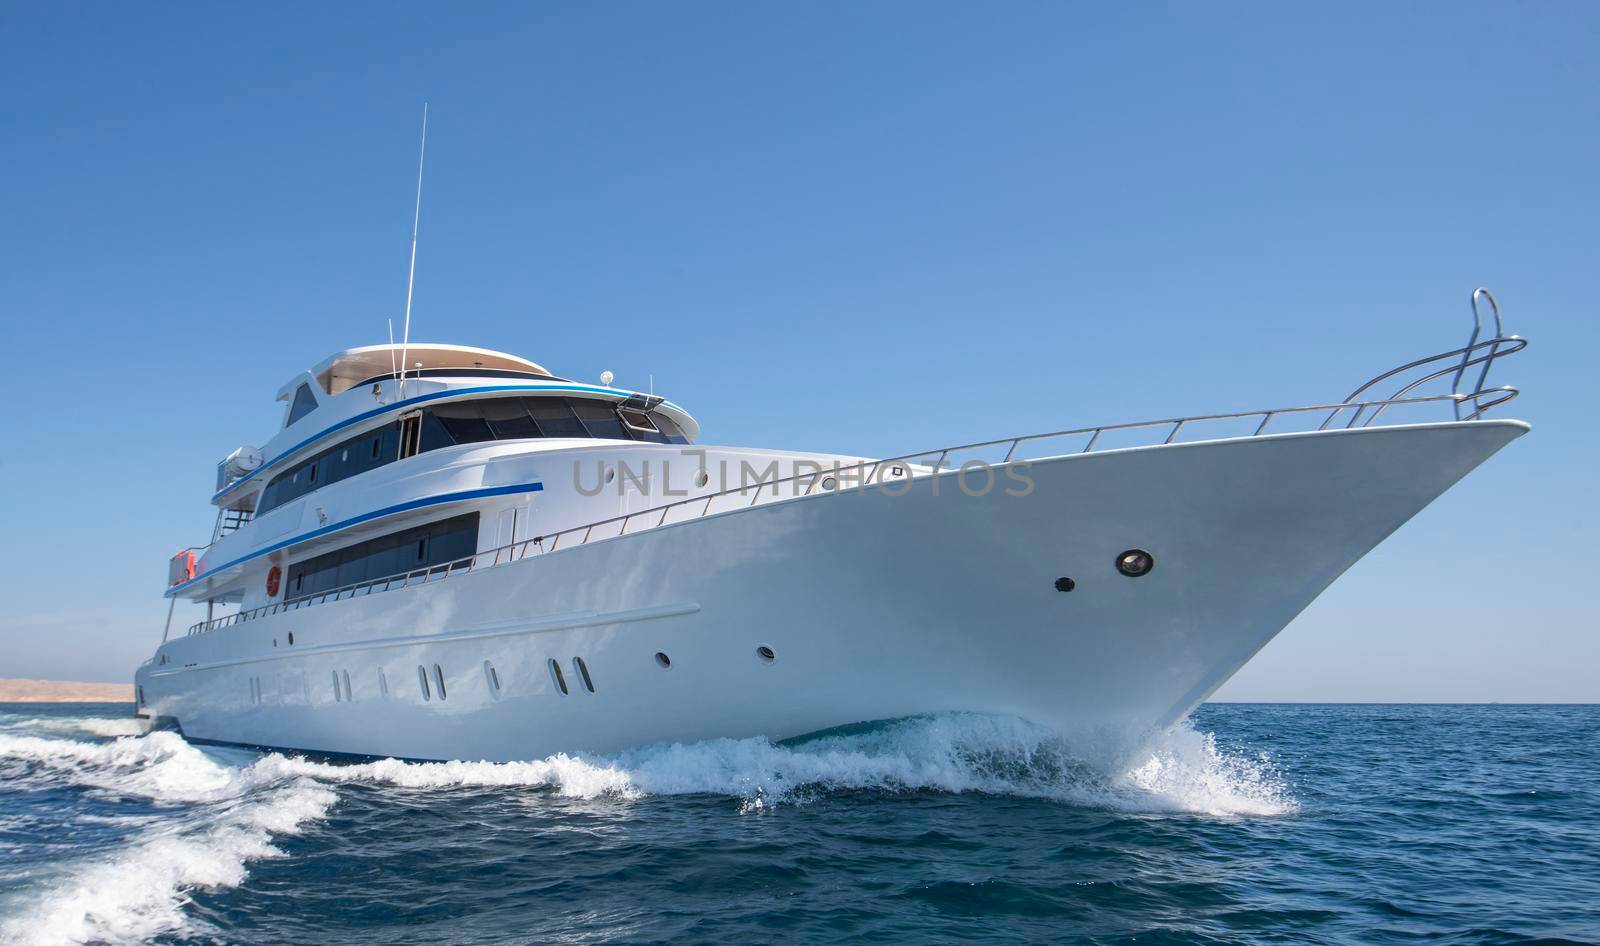 Luxury private motor yacht sailing under way on tropical sea with bow wave